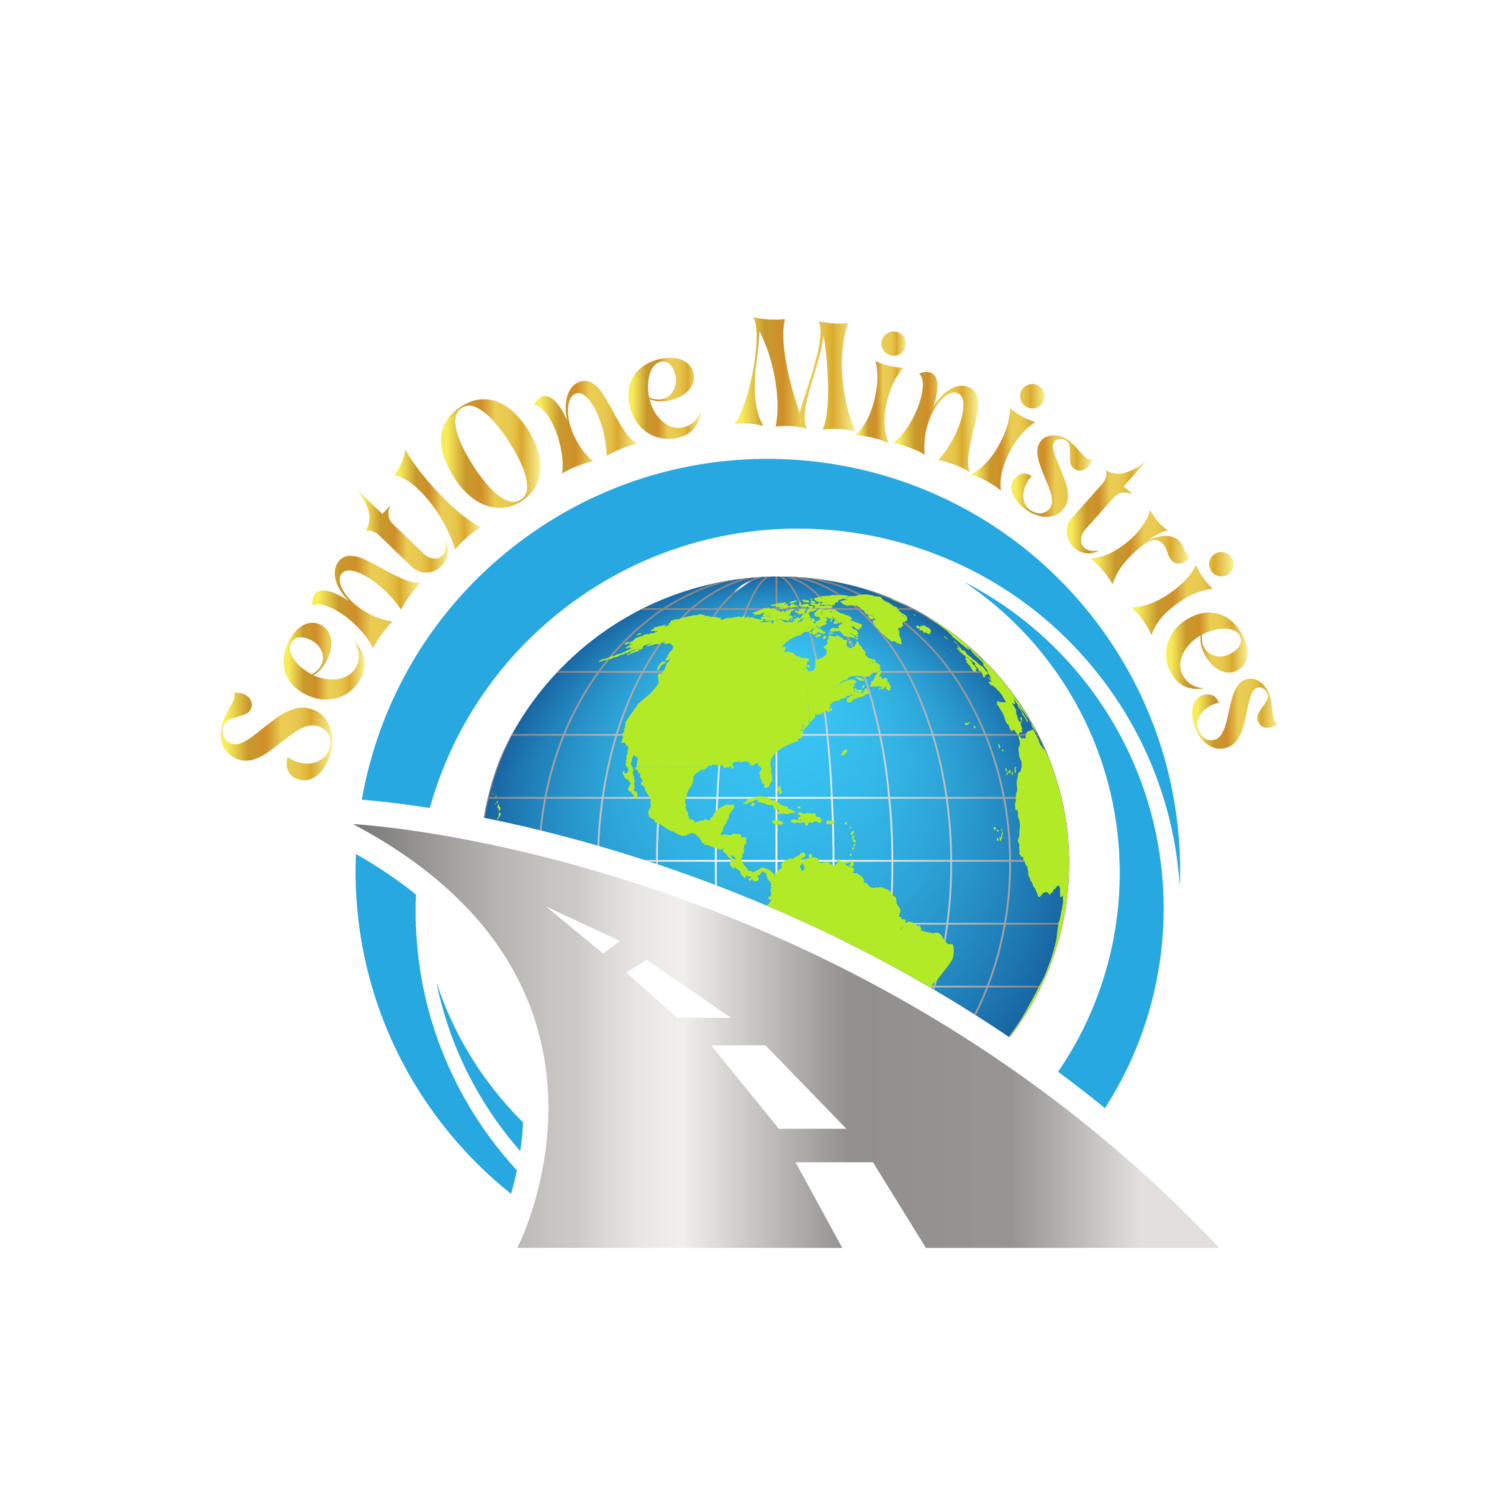 <span style="font-weight: bold;">Sent1One Ministries</span>